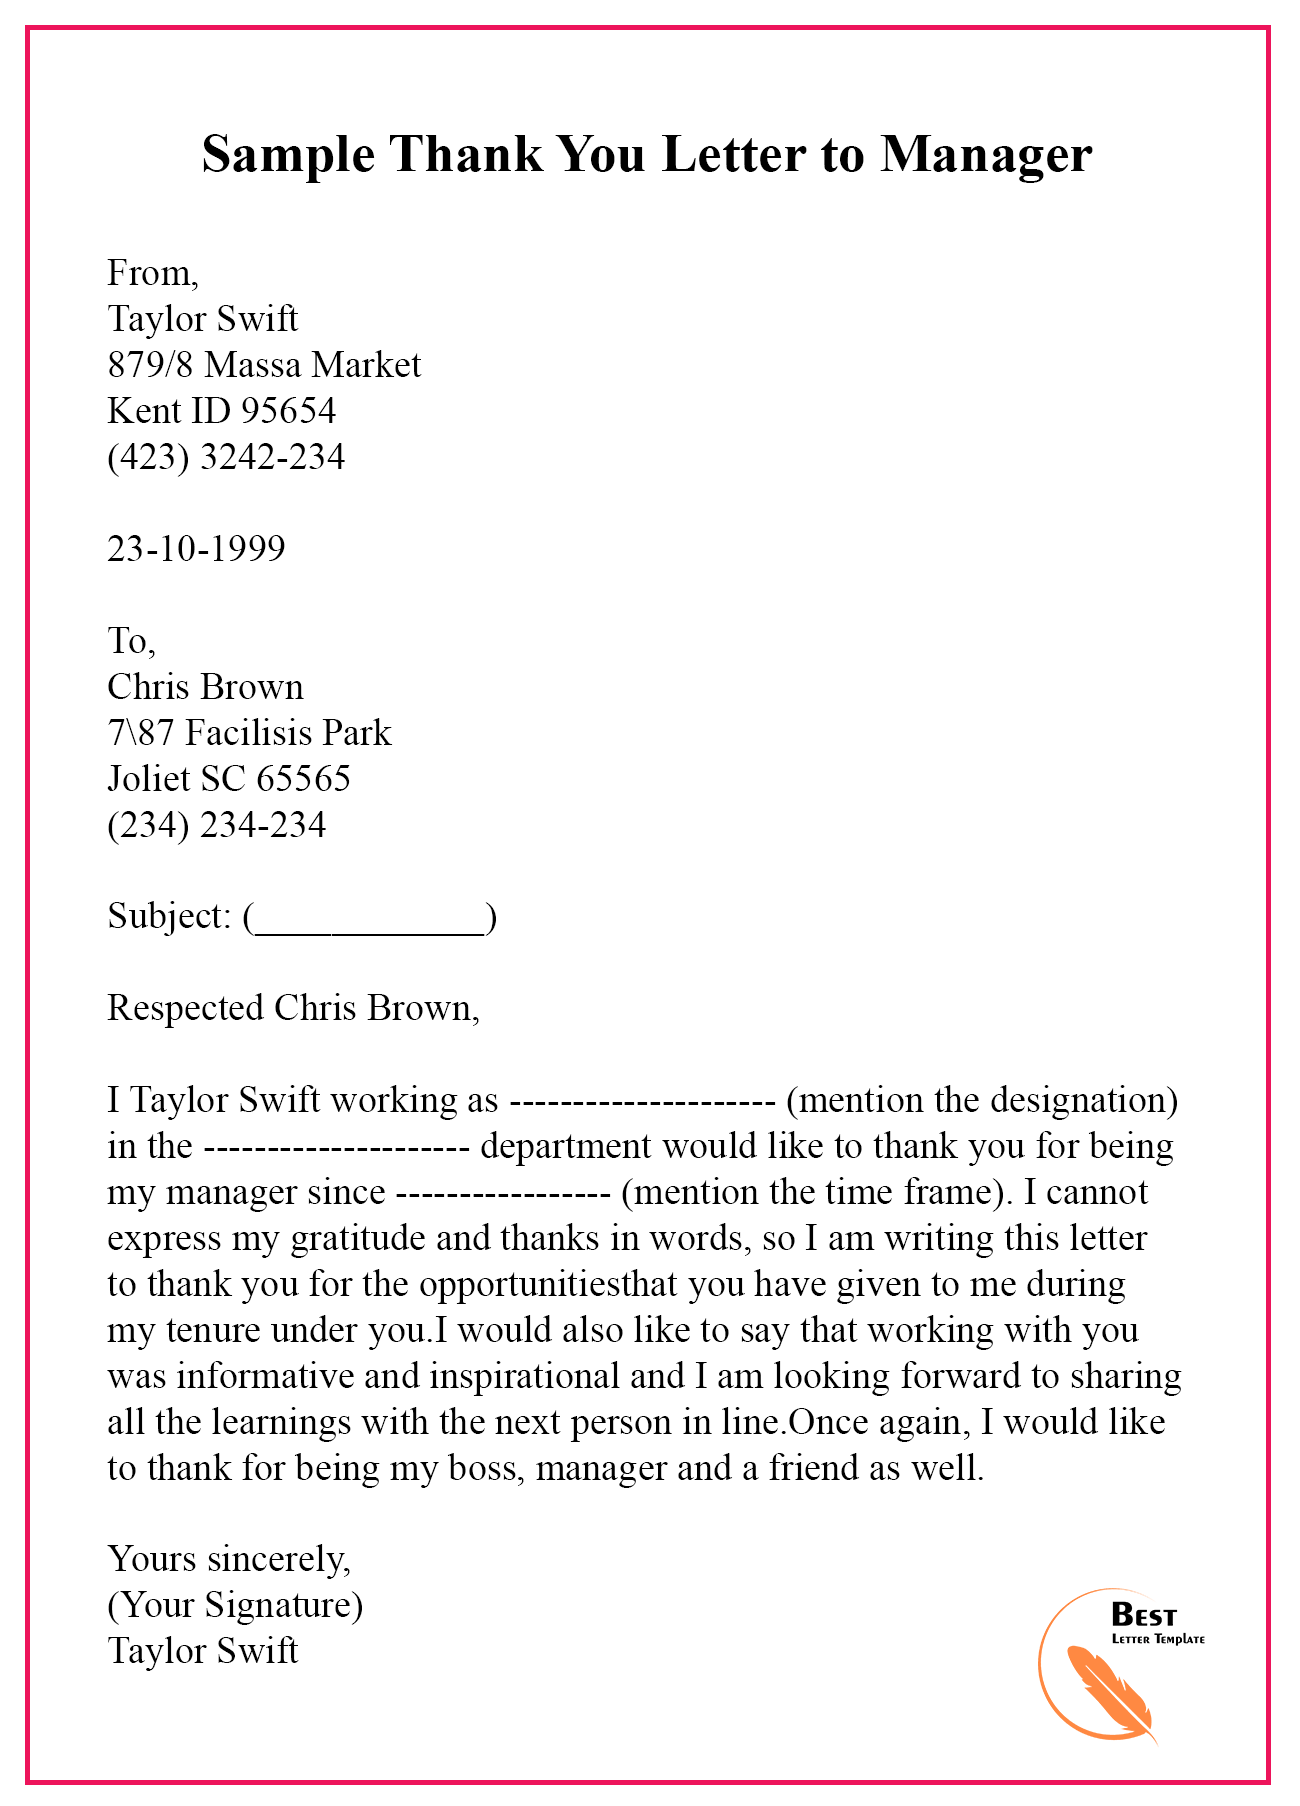 Thank You Letter Template to Boss/Manager - Sample & Examples